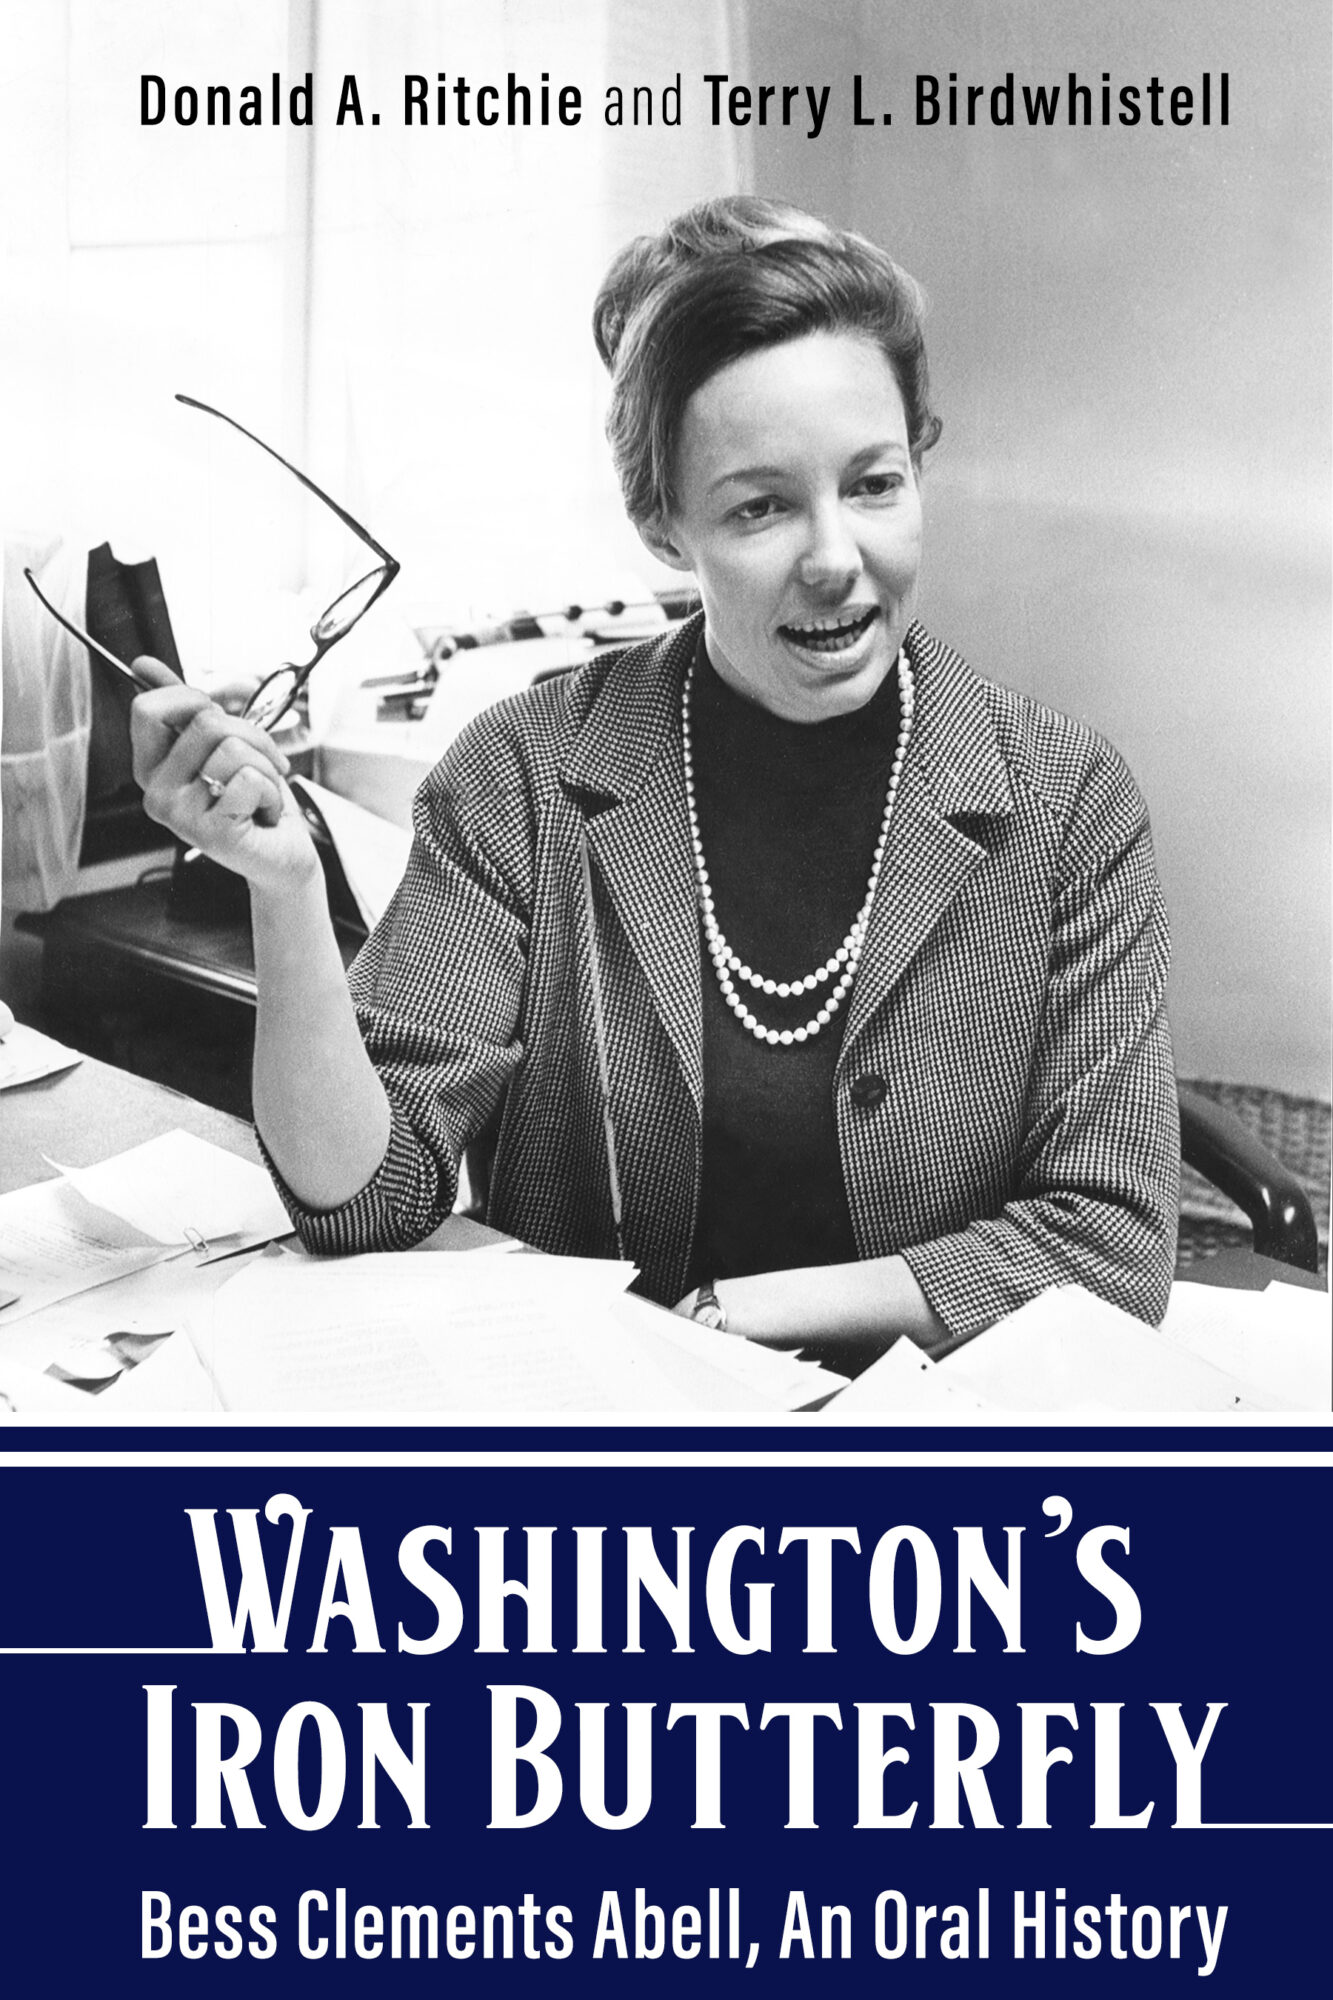 Washington’s Iron Butterfly: Bess Clements Abell, An Oral History